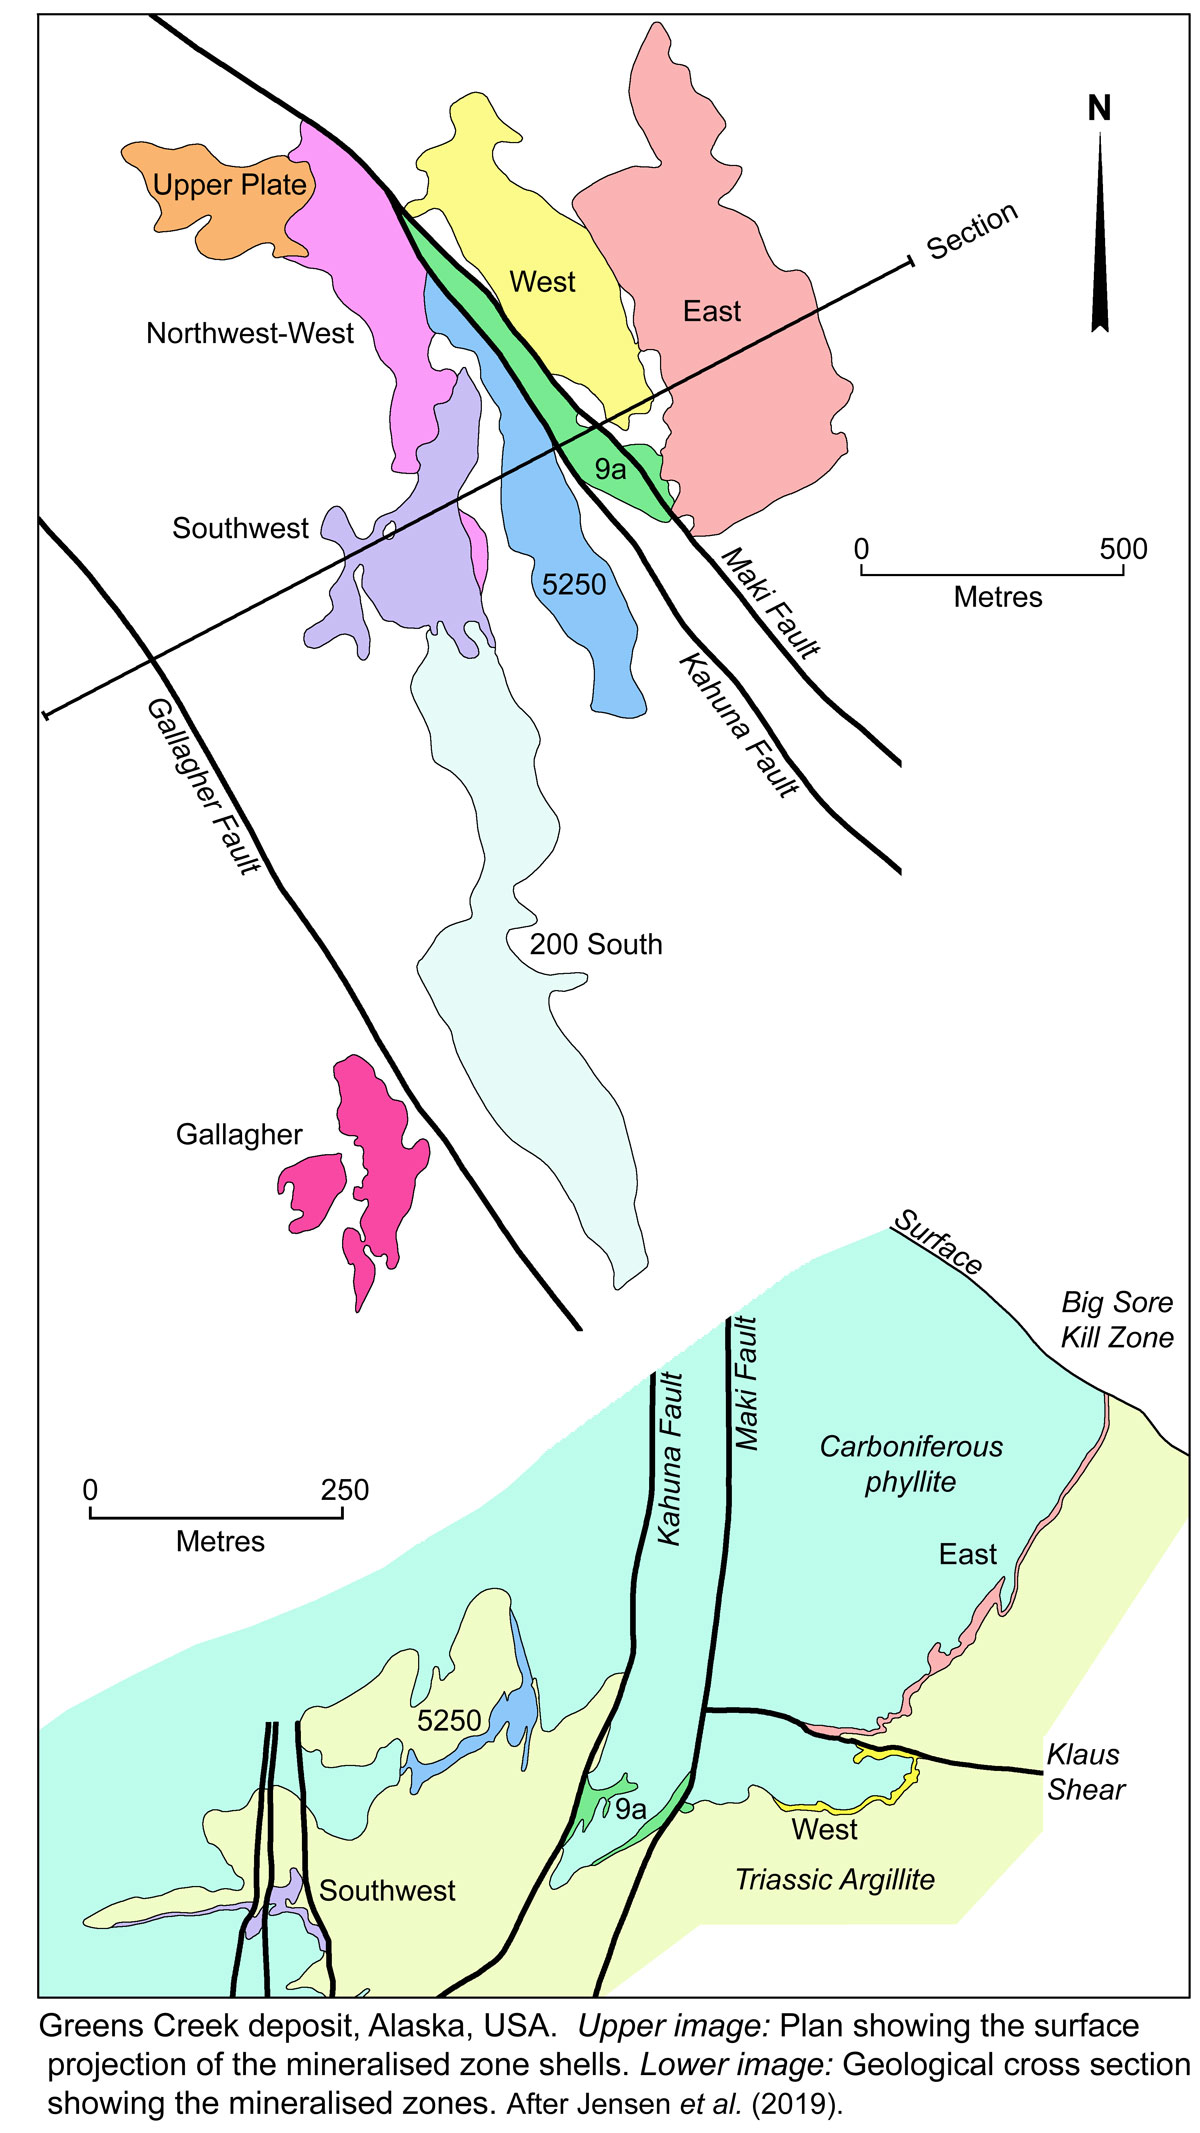 Greens Creek geology and mineralisation